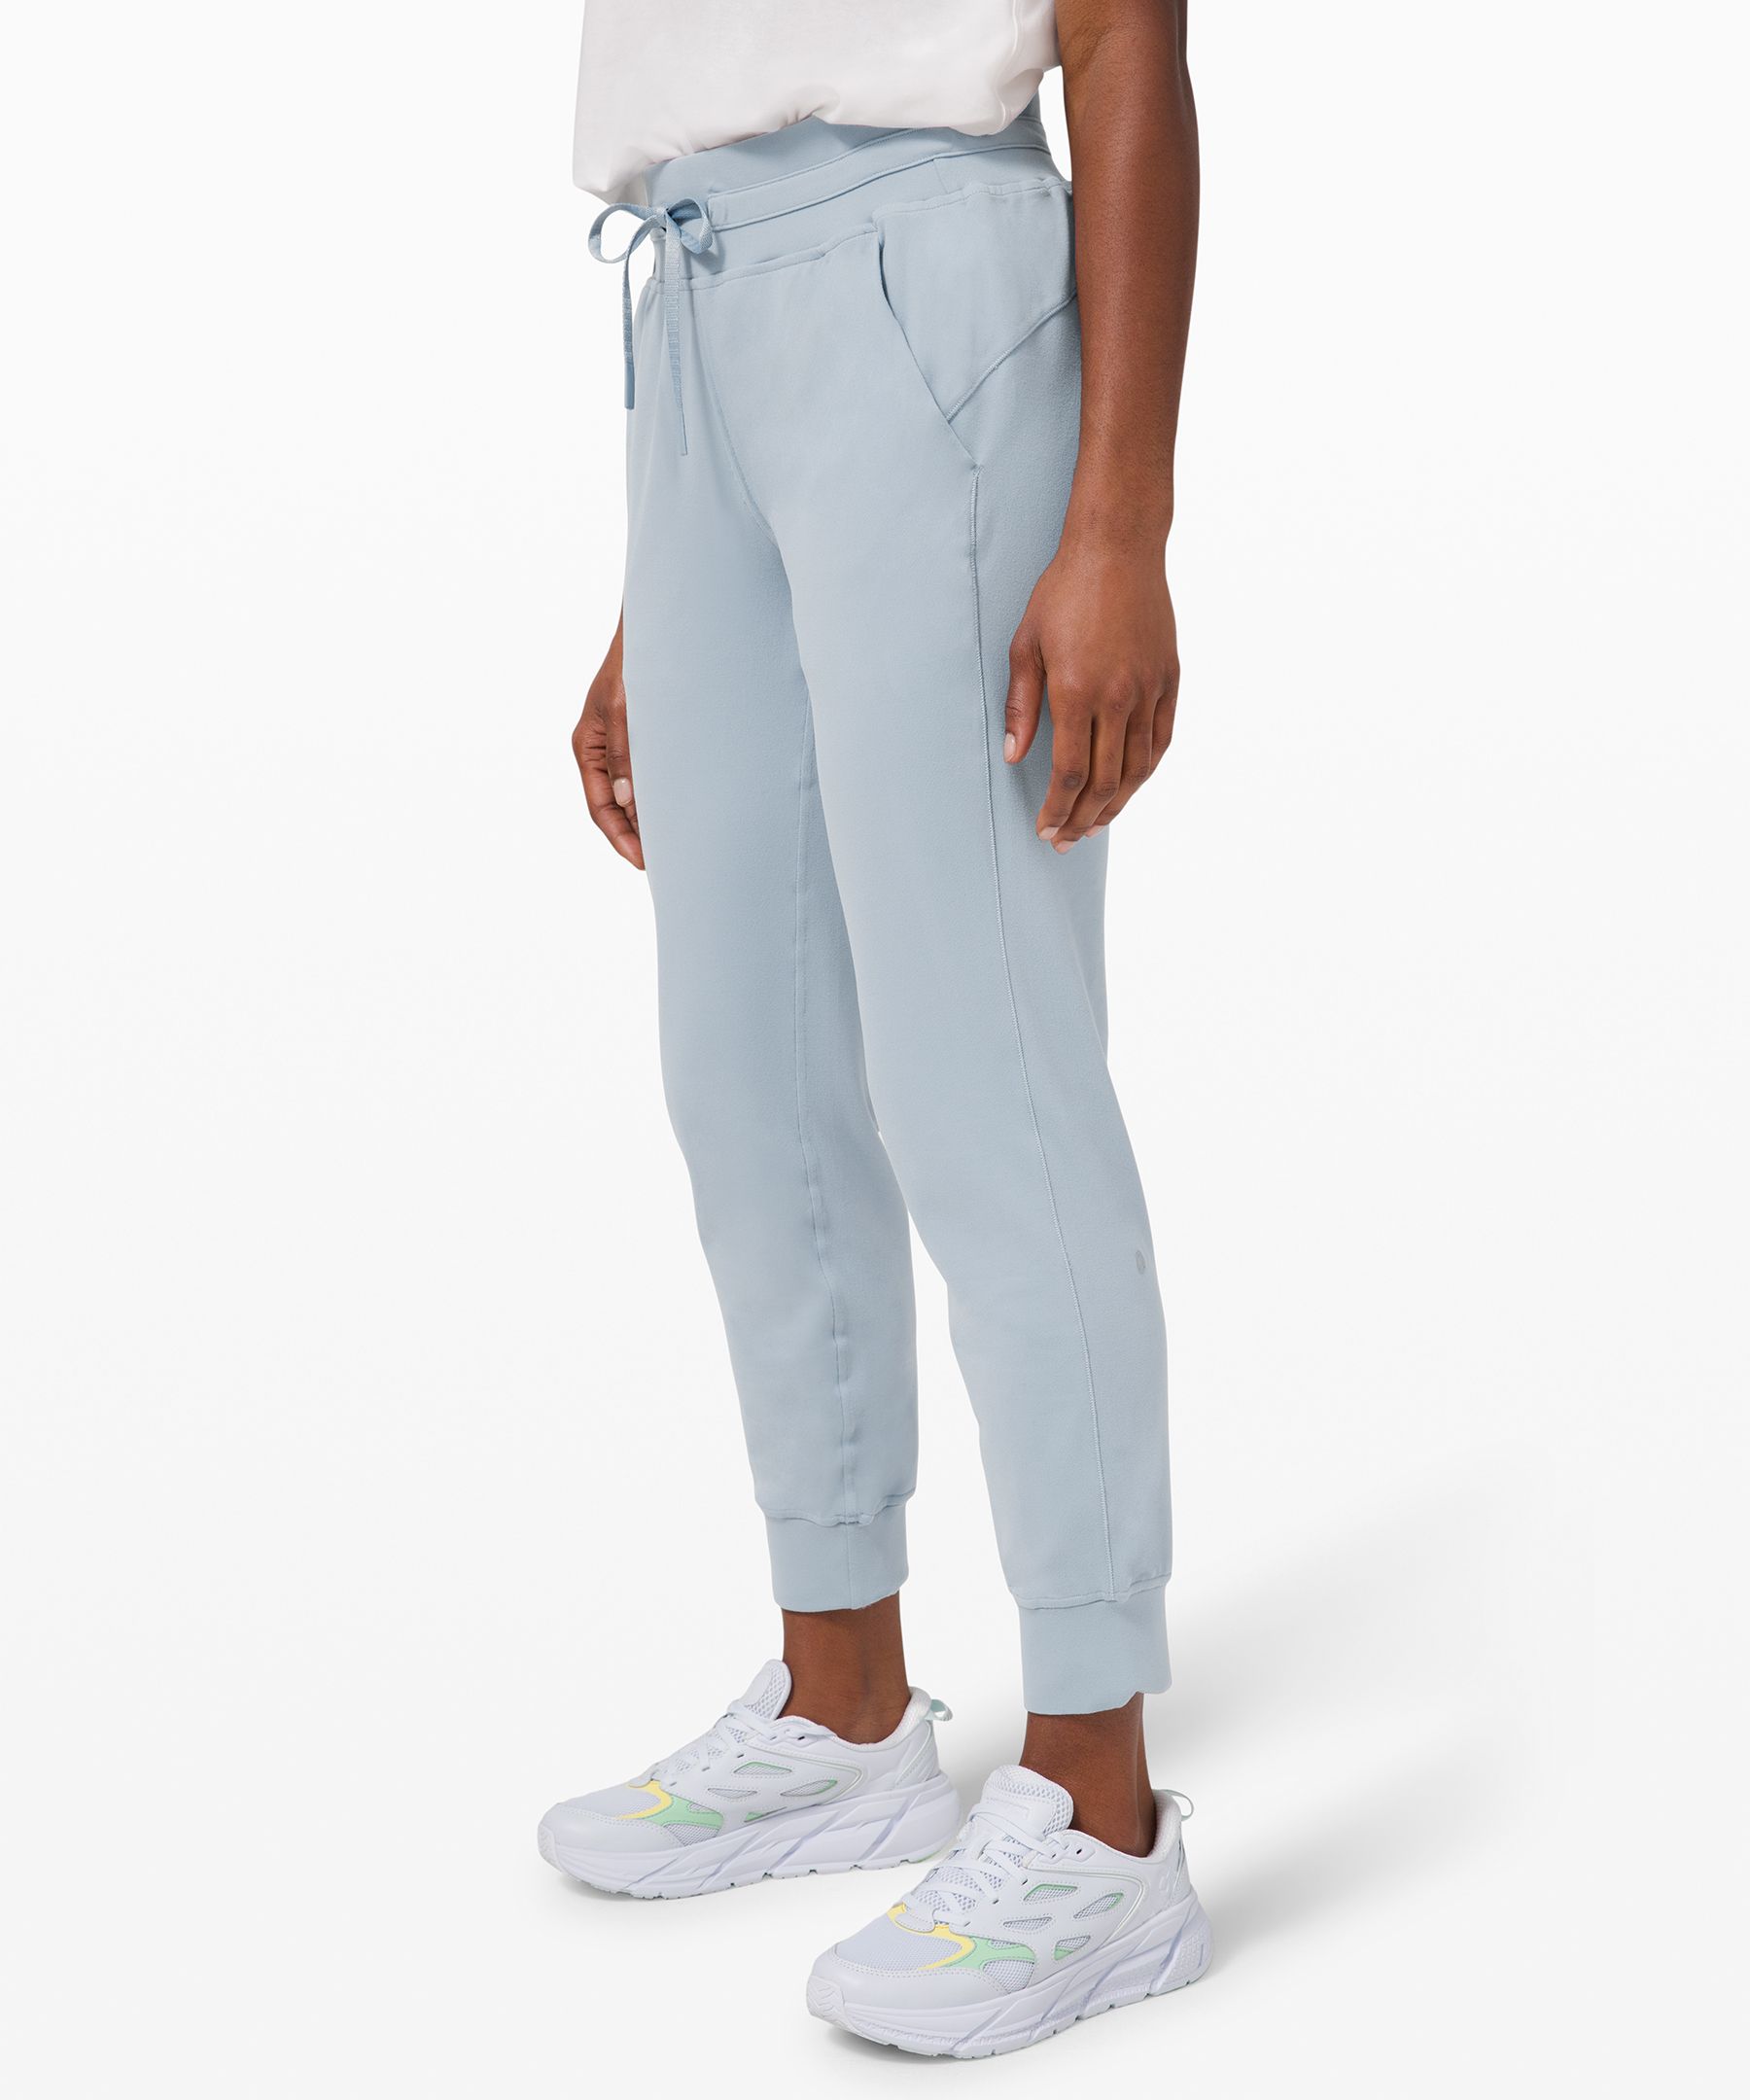 Ready to Rulu High-Rise Jogger 7/8 Length